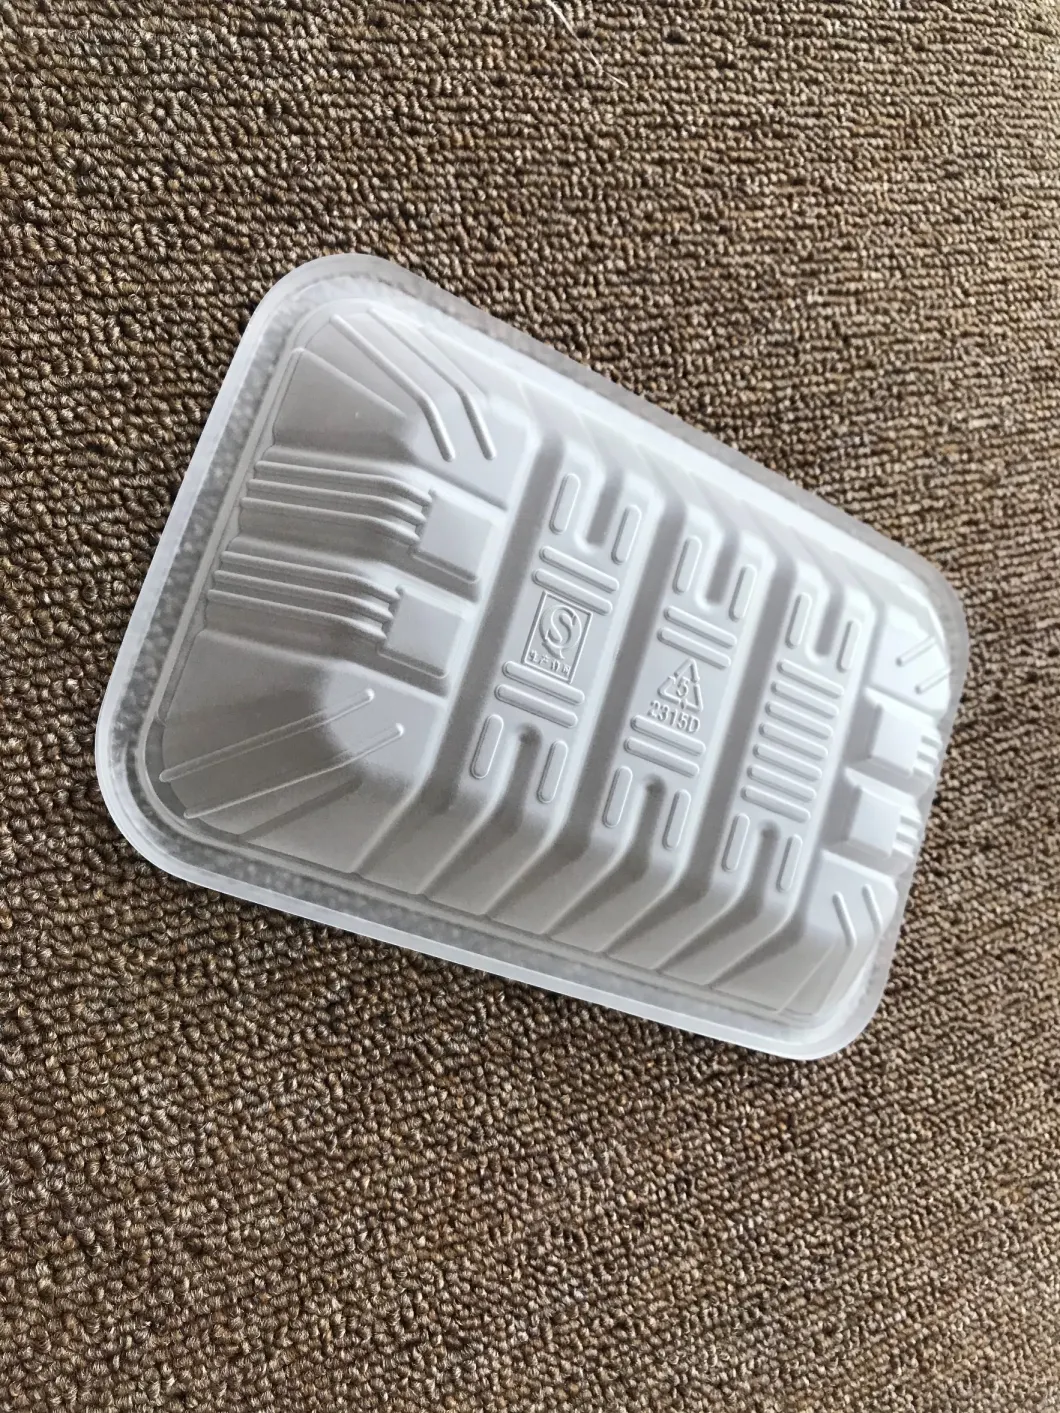 OEM Plastic Food Blister Packaging Box ,Disposable Tray For White Food container